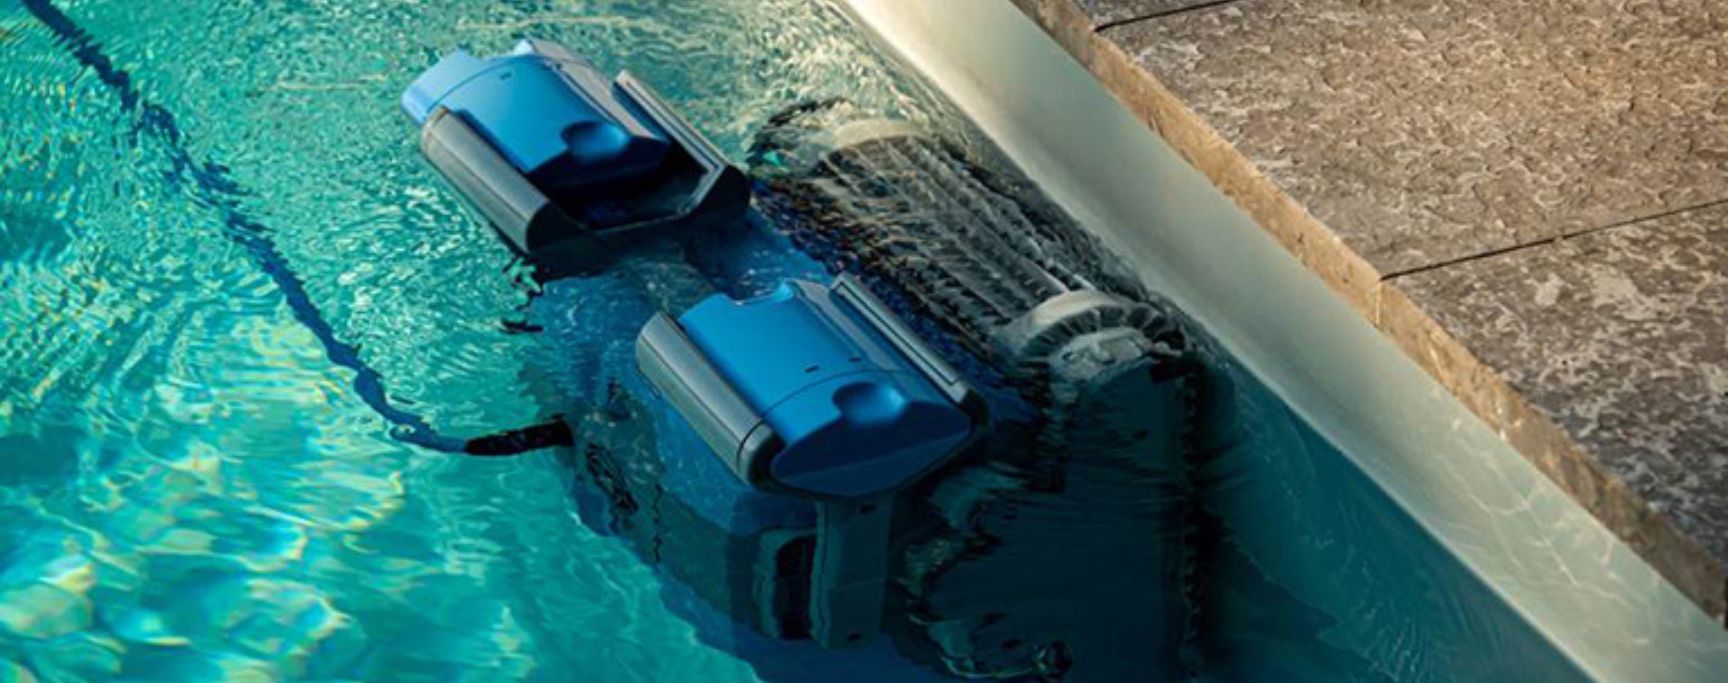 robot piscine frequence